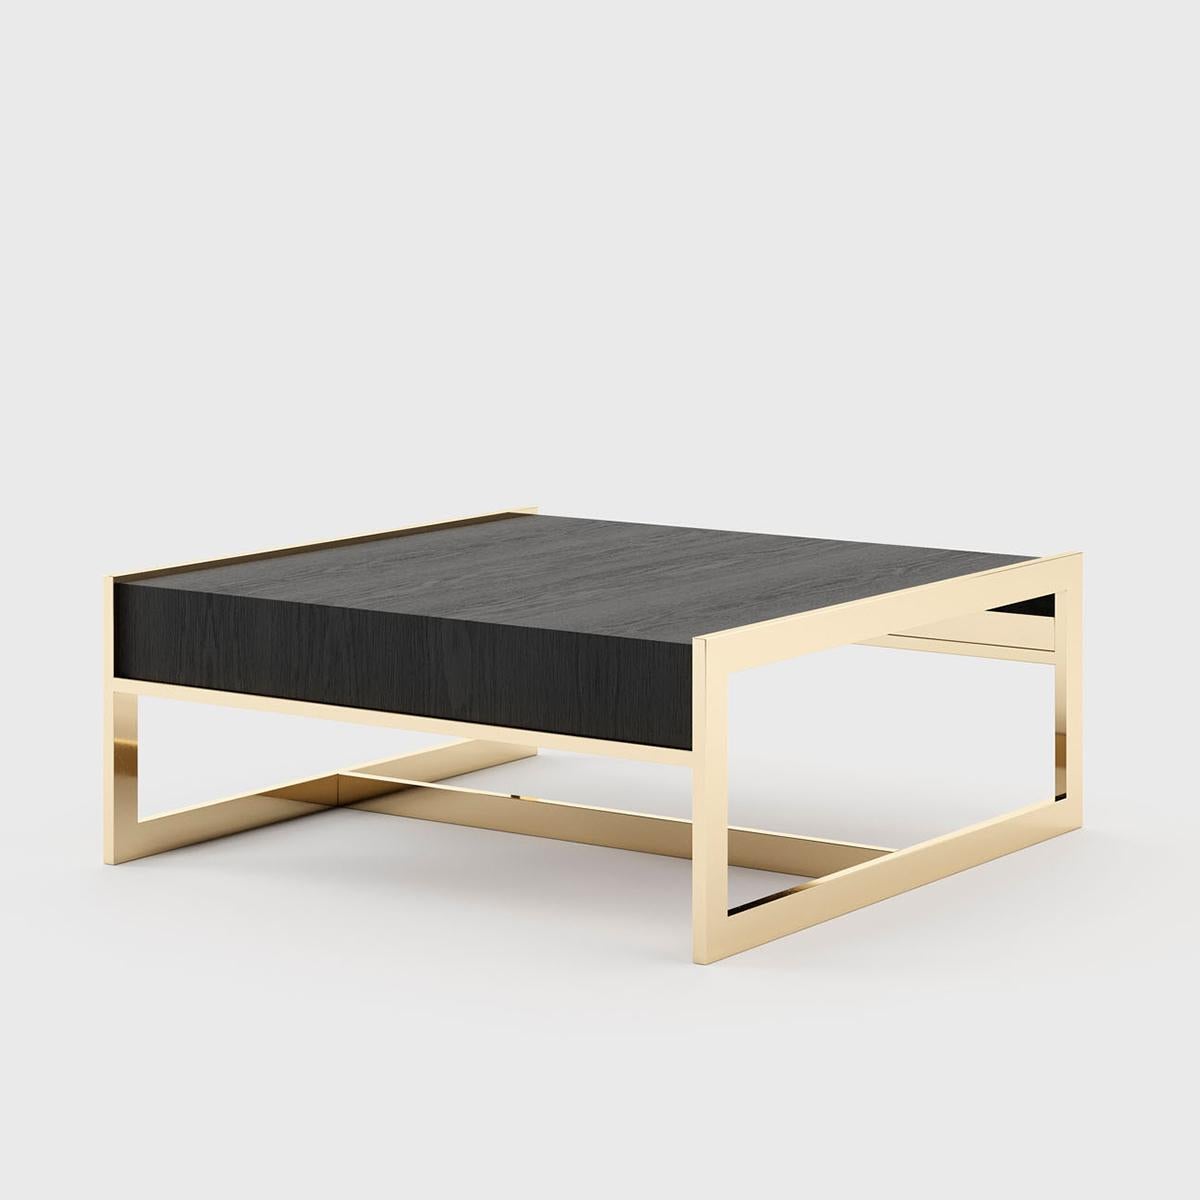 Coffee table lounge down with structure in polished
stainless steel in gold finish. With ash top in black matte
finish. Also available with other stainless finishes and
other wood finishes on request.